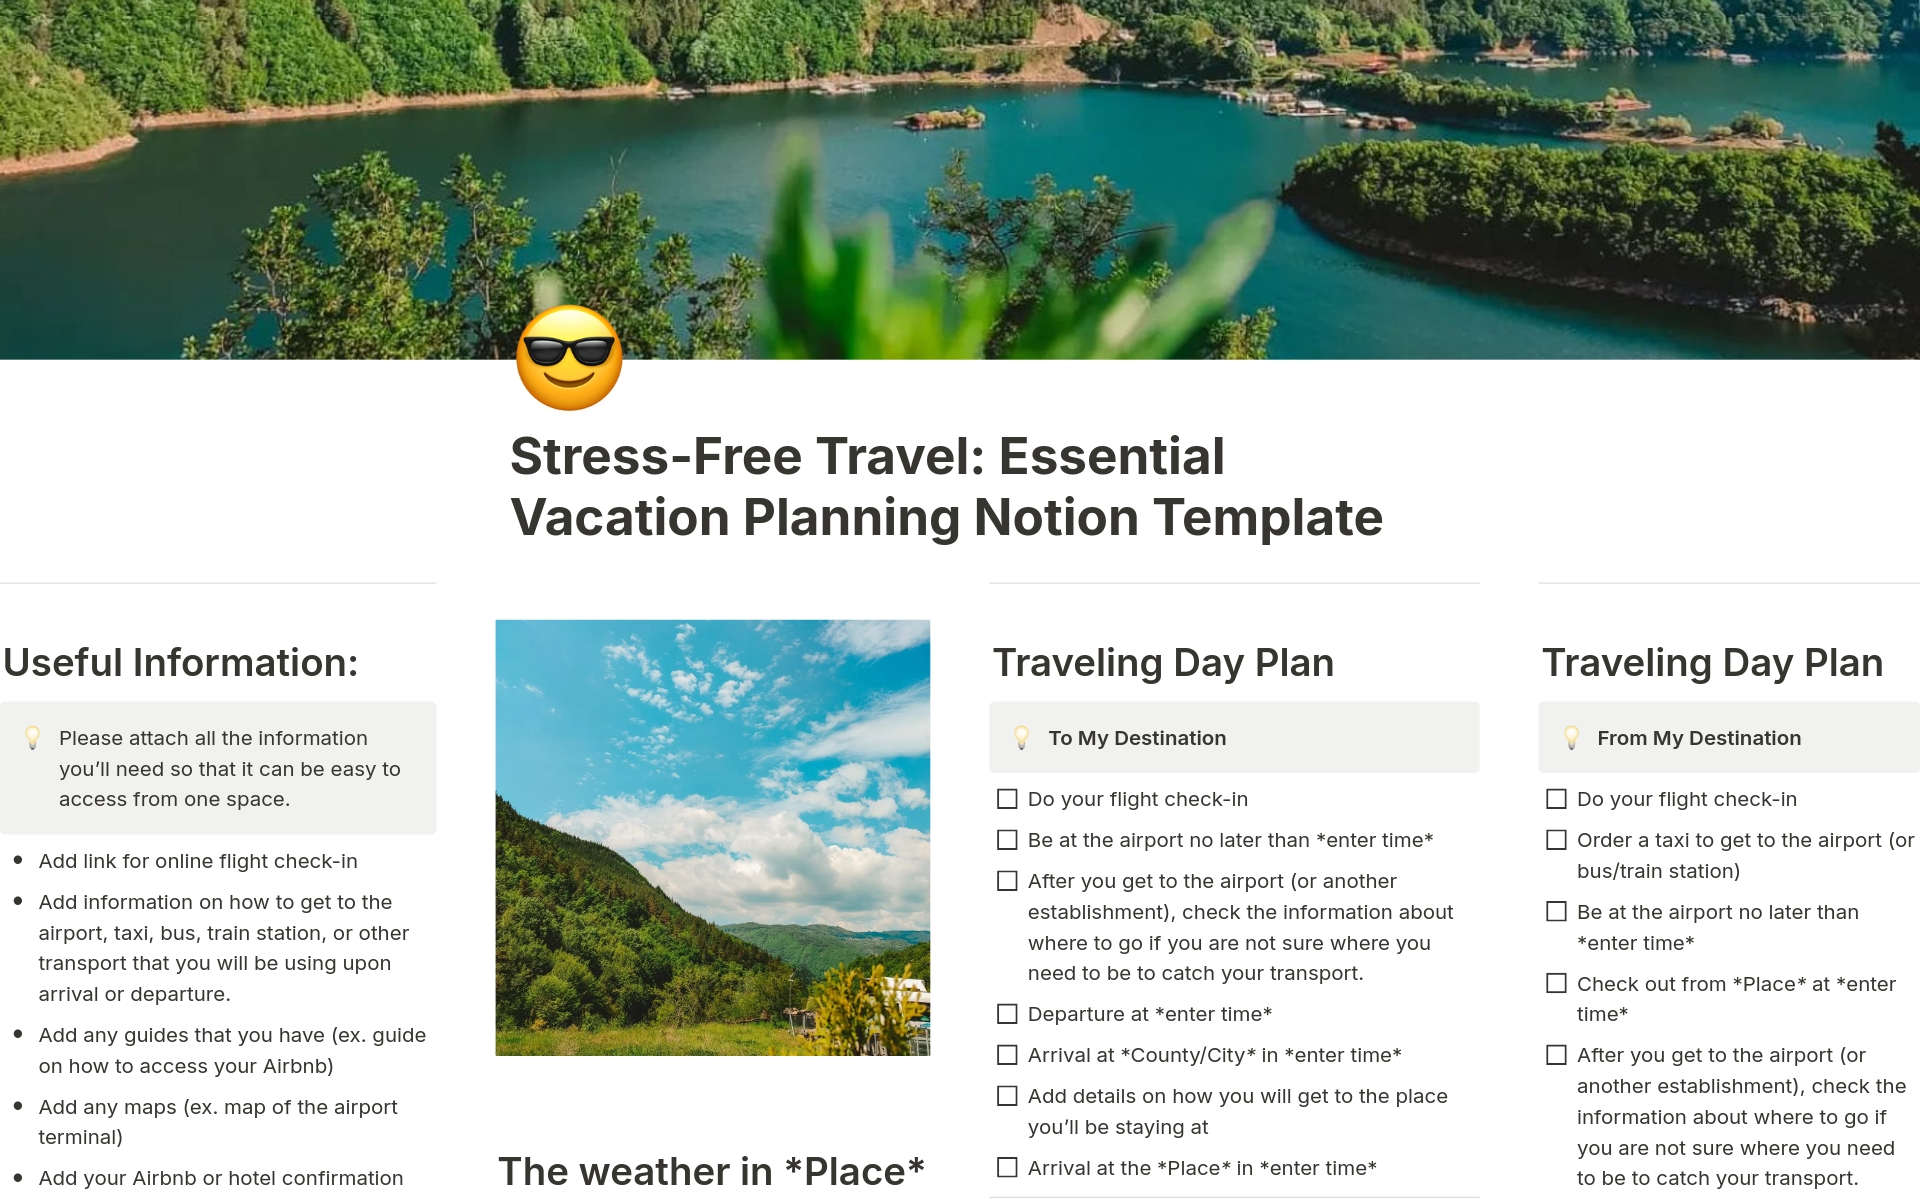 Ready to turn your travel dreams into reality without the hassle?
Introducing the Stress-Free Travel: Essential Vacation Planning Notion Template, your ultimate companion for effortless holiday planning! This friendly and user-friendly template!